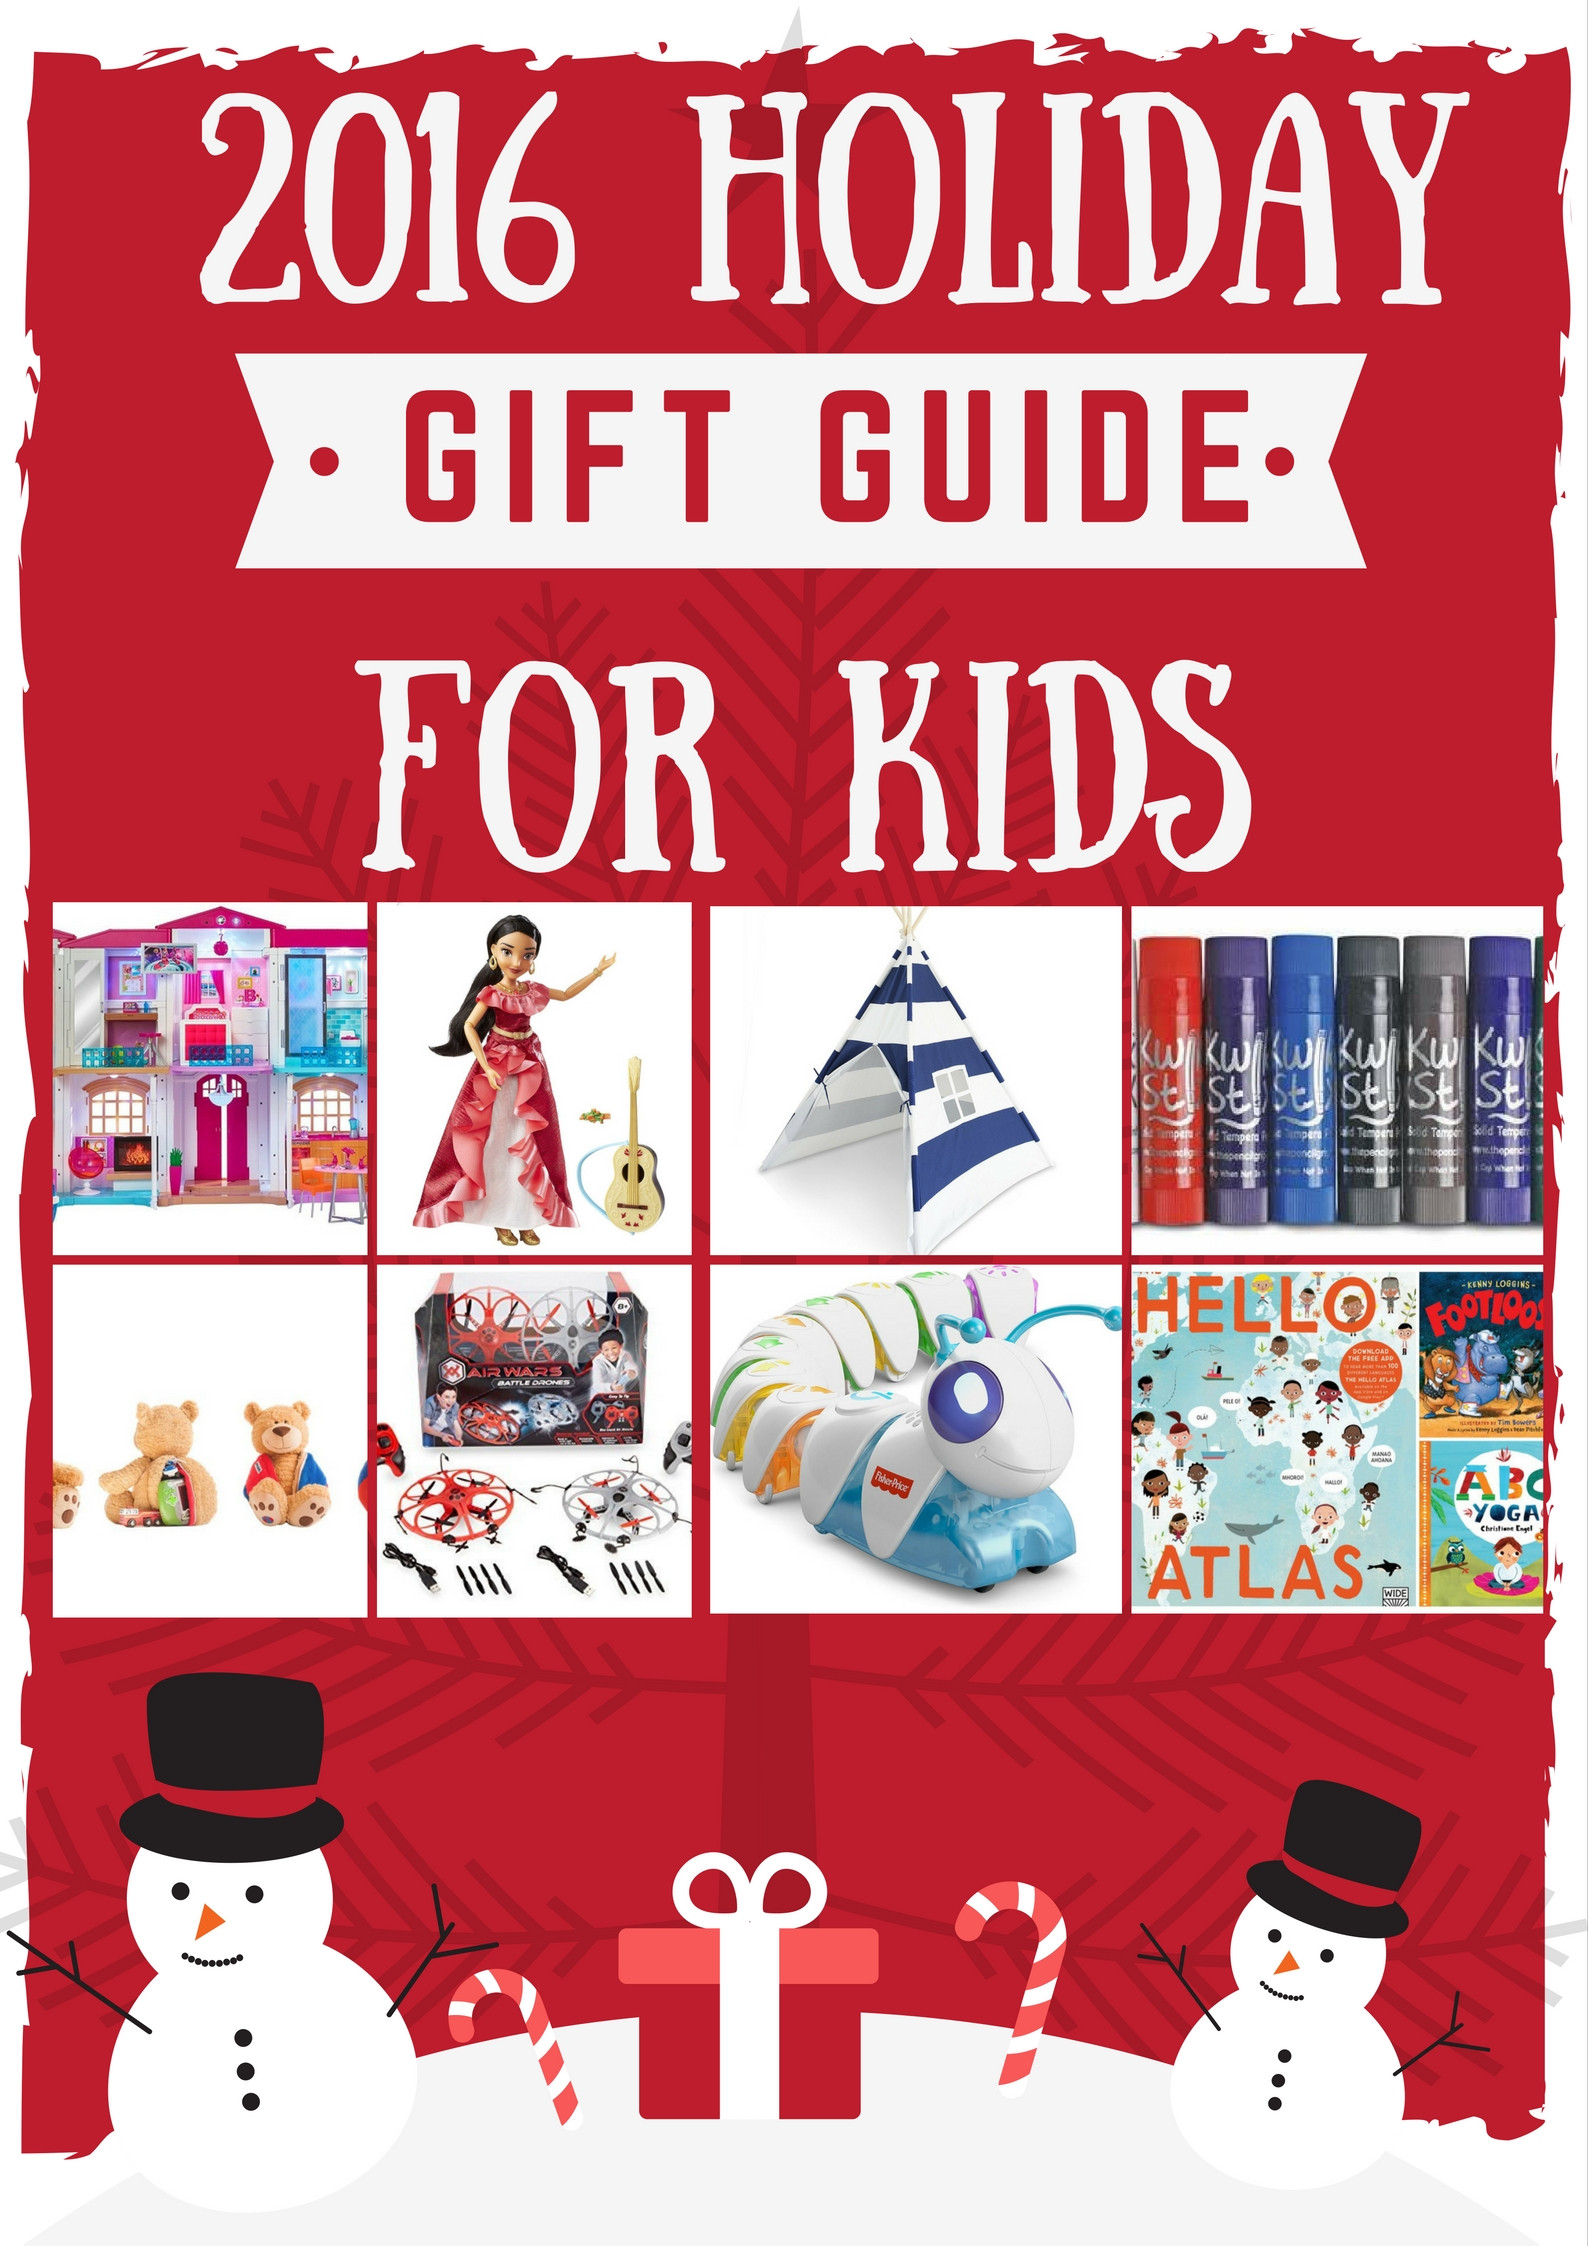 Holiday Gift Guides For Kids
 Holiday Gift Guide 2016 Gifts For Kids